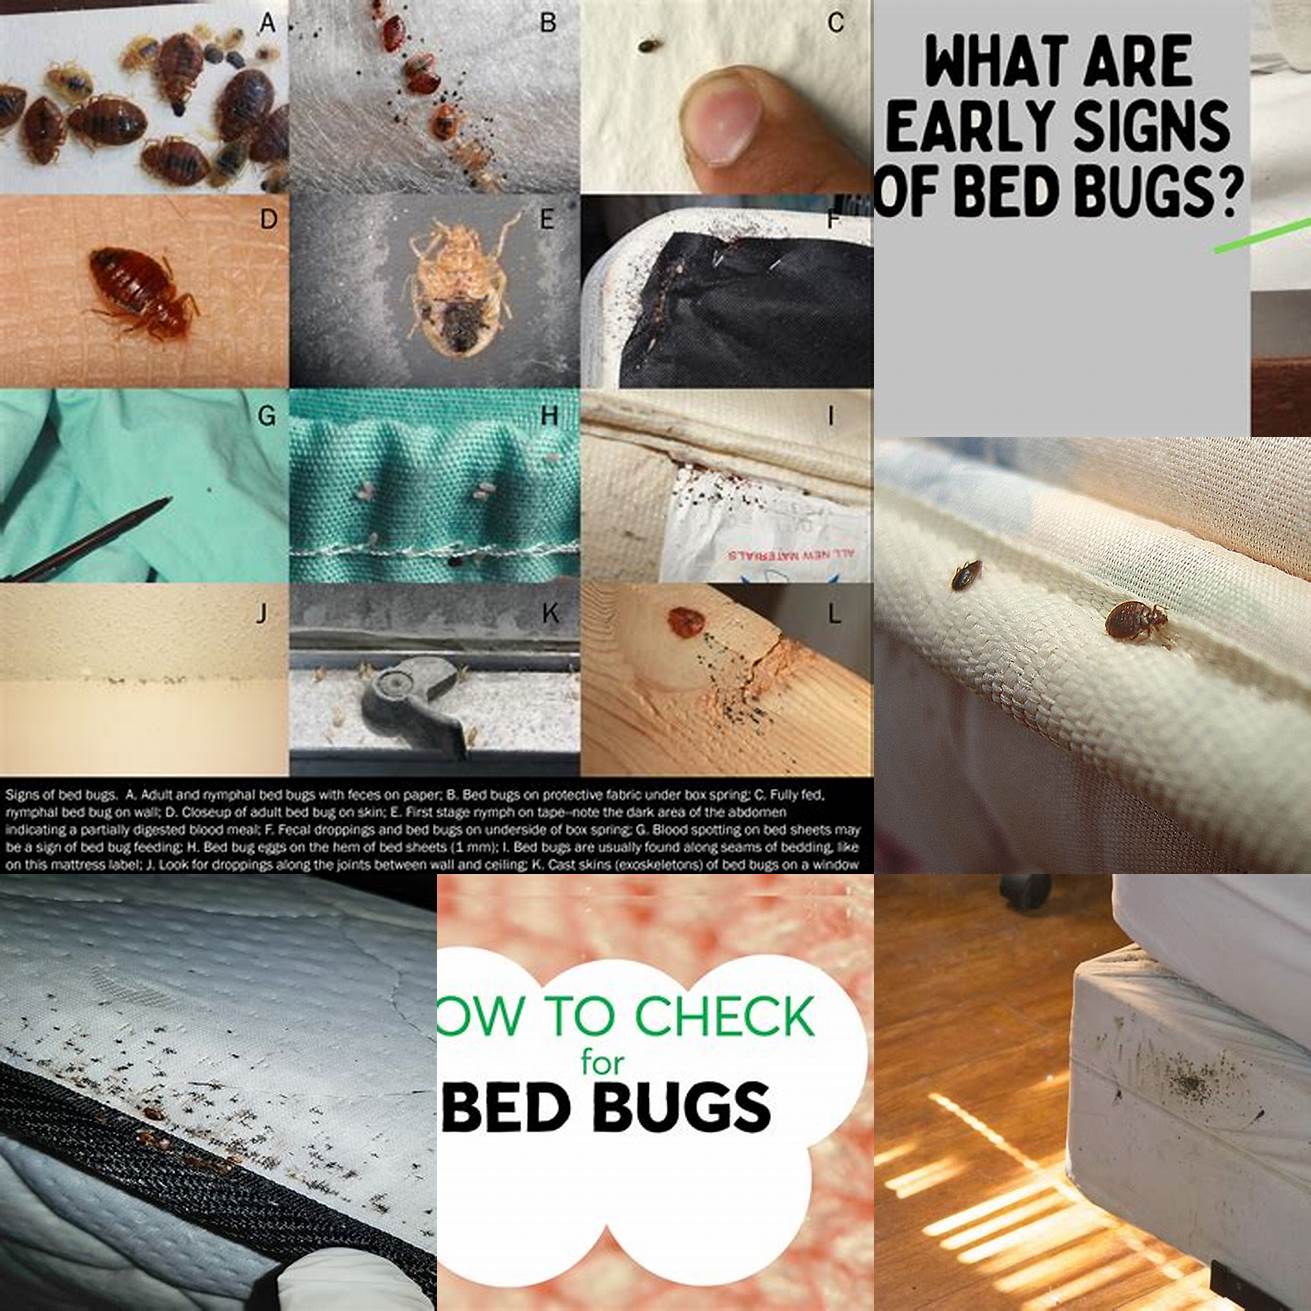 Check for Signs of Insects or Pests